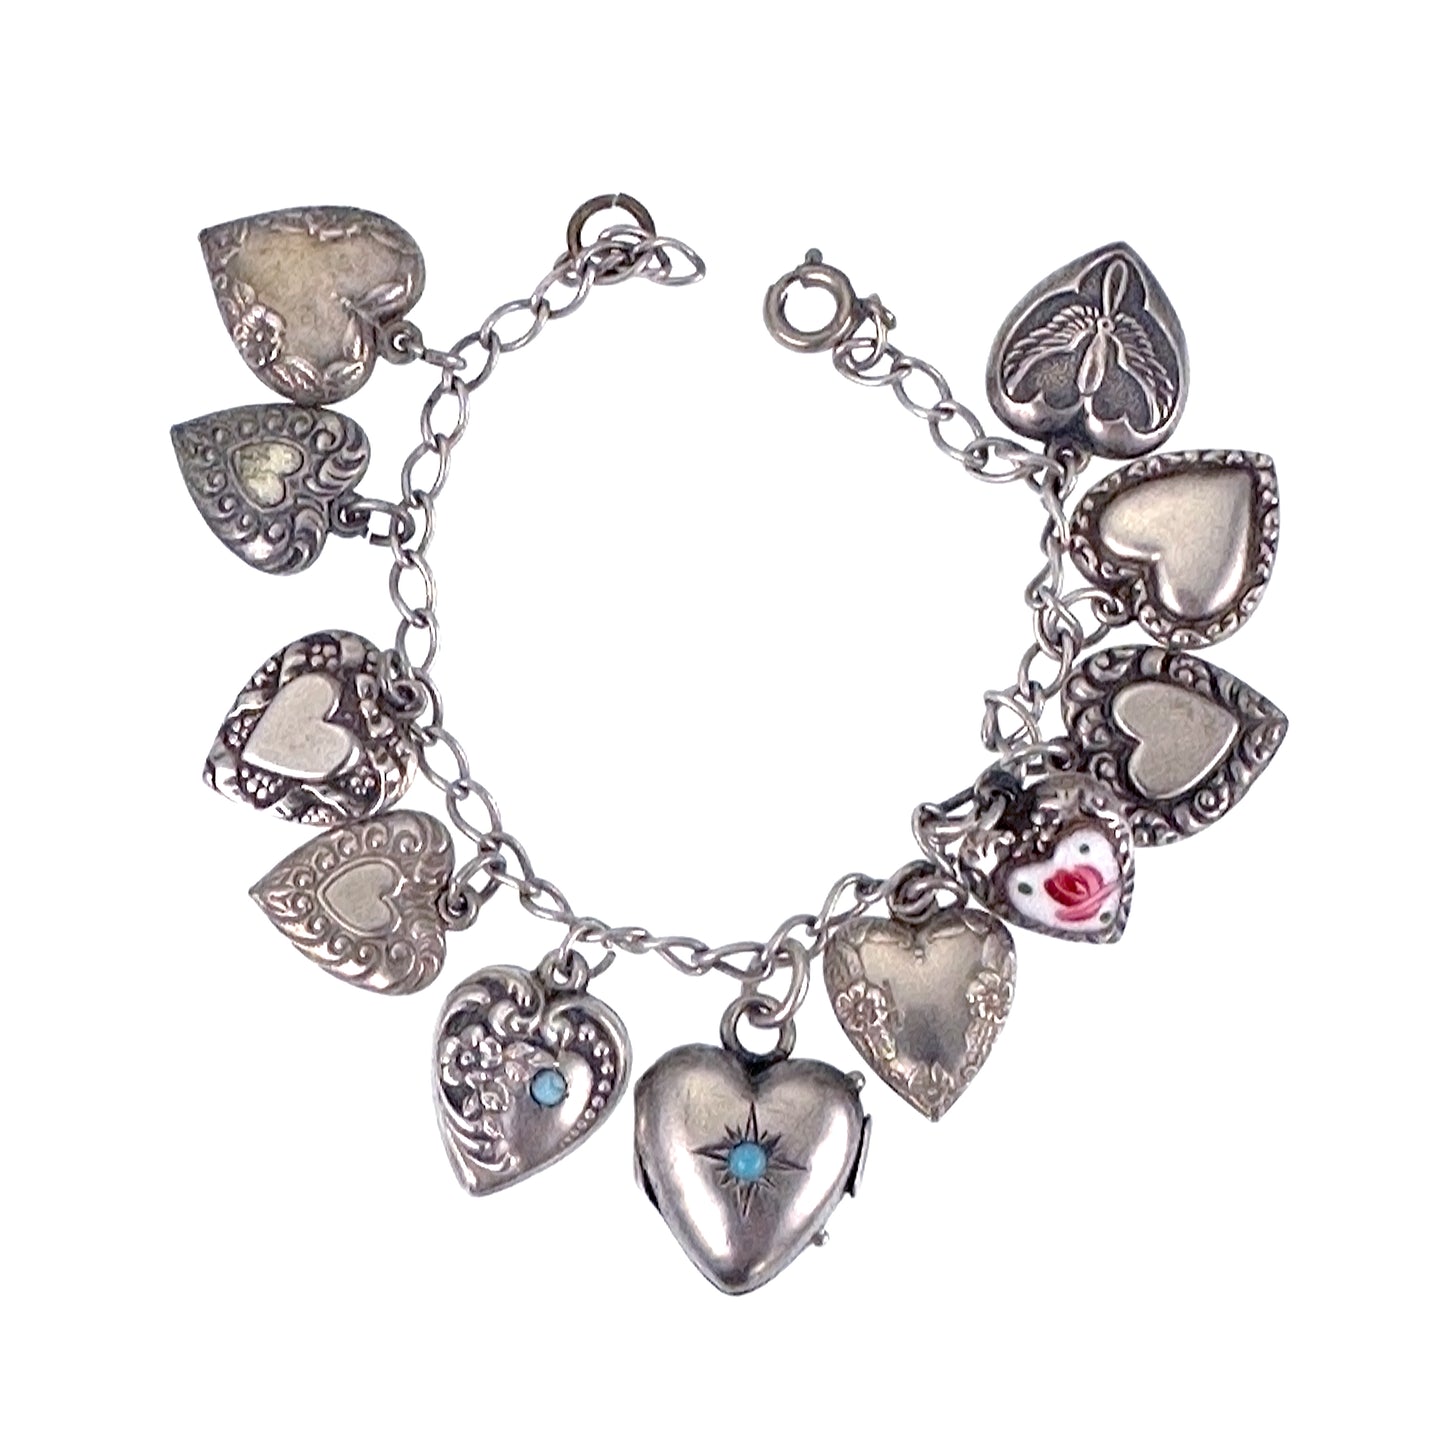 Art Deco Silver Puffy Heart Charm Bracelet, Antique Heart Padlock, Engraved  Personalized, Vintage Jewelry - Etsy